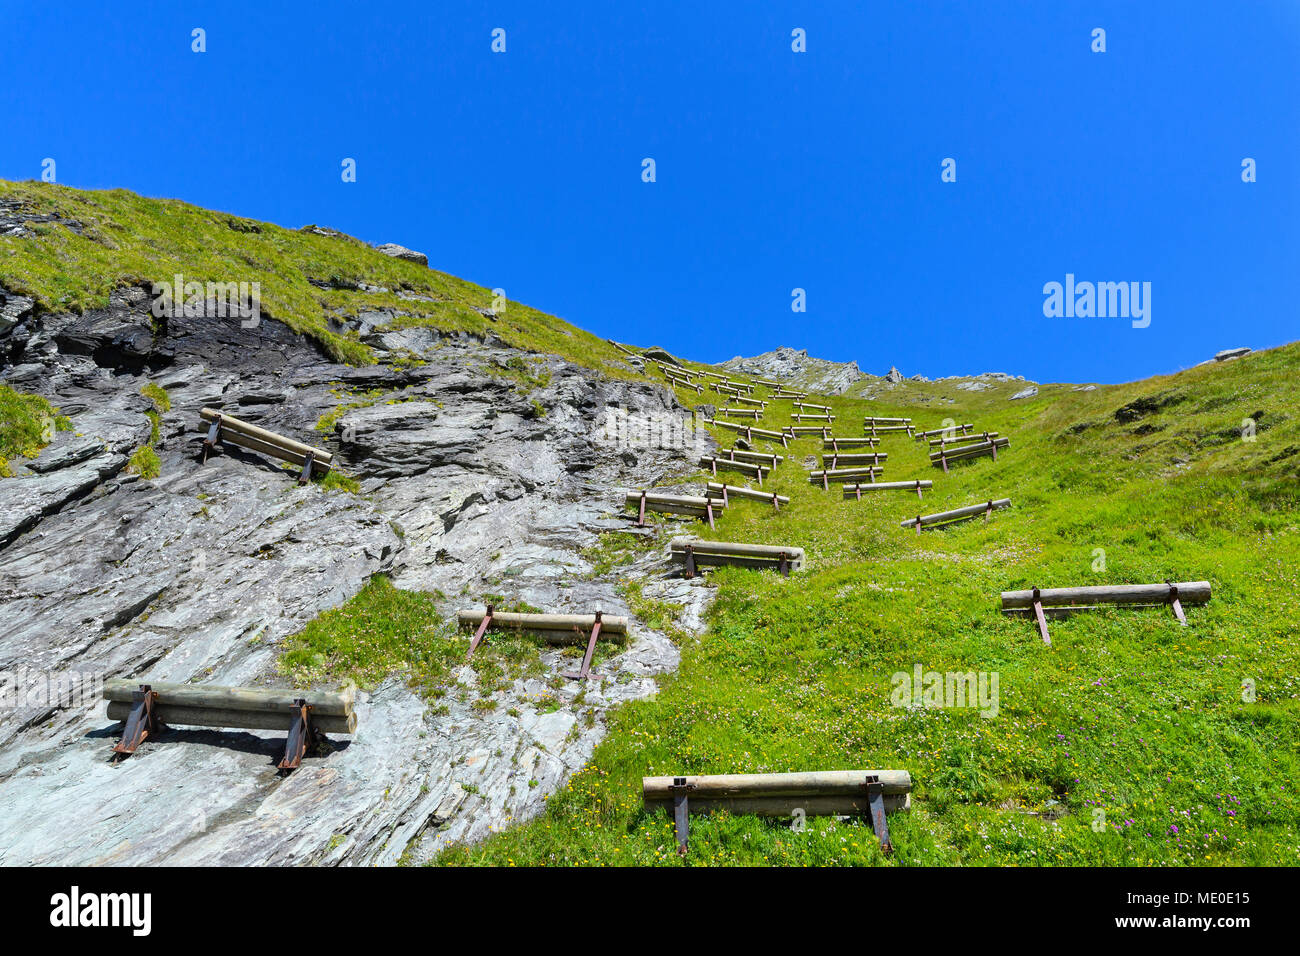 Avalanche control at Kaiser Franz Josefs Hohe in Grossglockner High Alpine Road, Hohe Tauern National Park in Carinthia, Austria Stock Photo